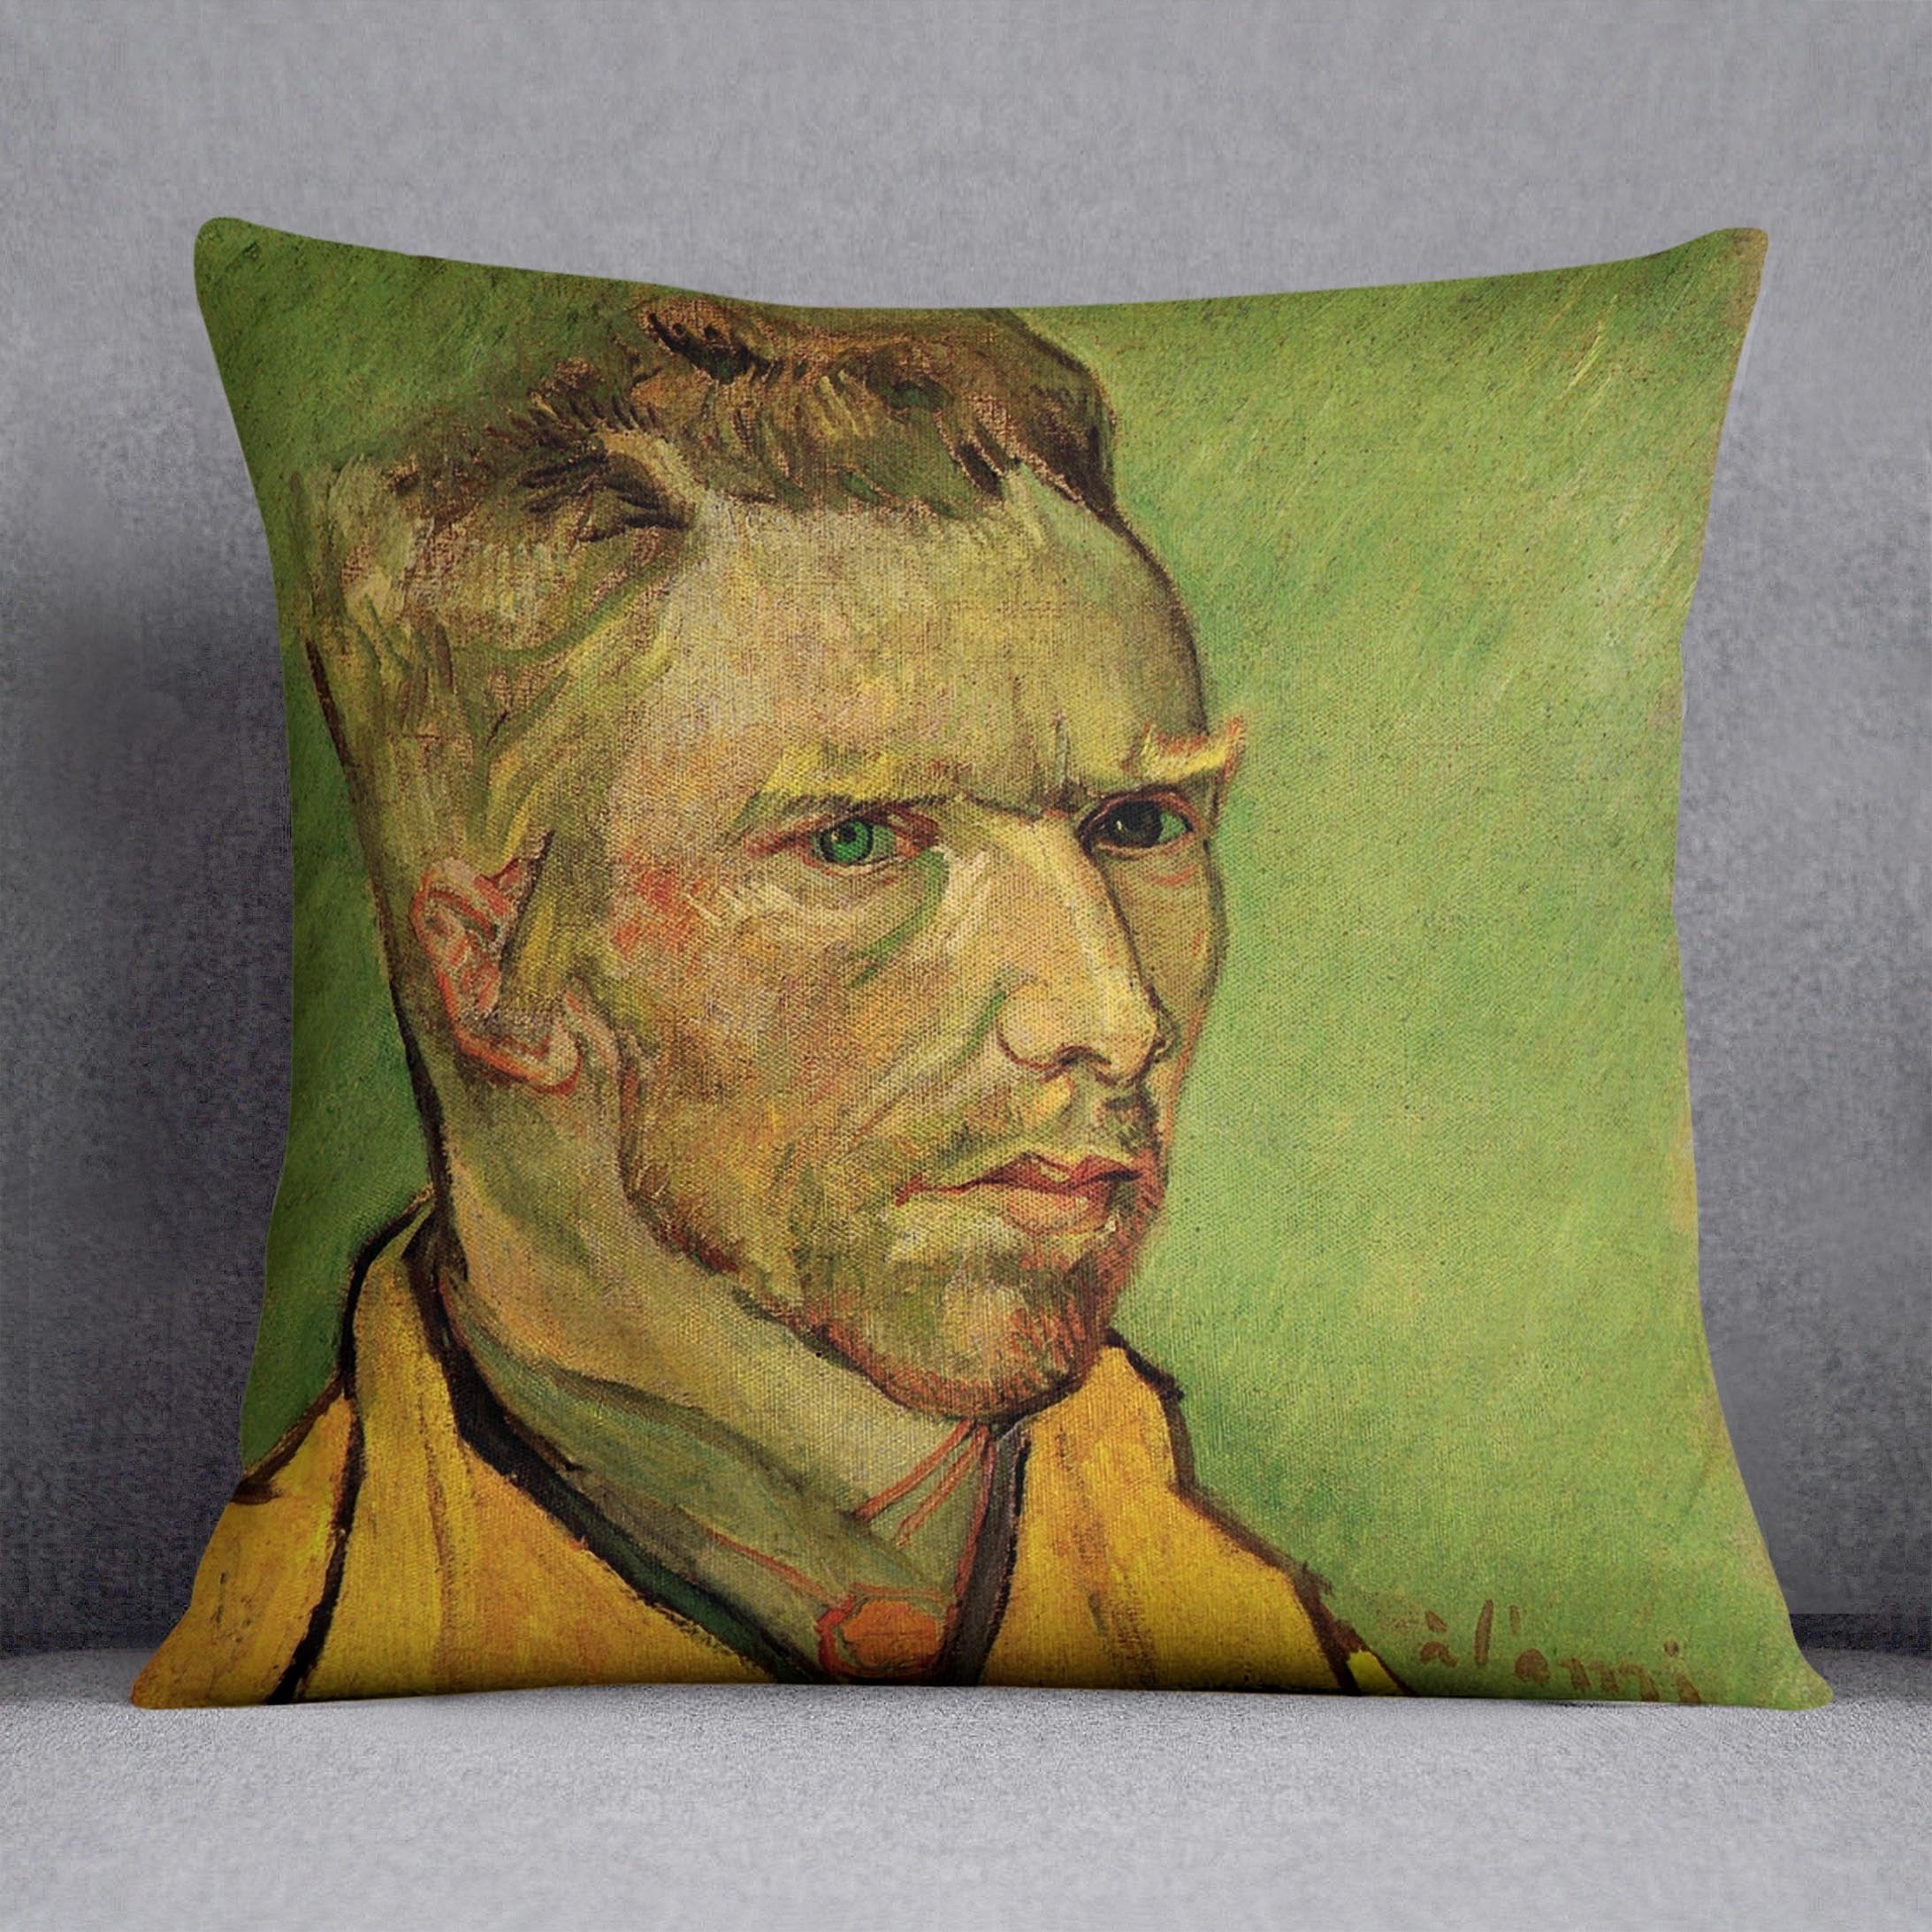 Another Self-Portrait by Van Gogh Throw Pillow